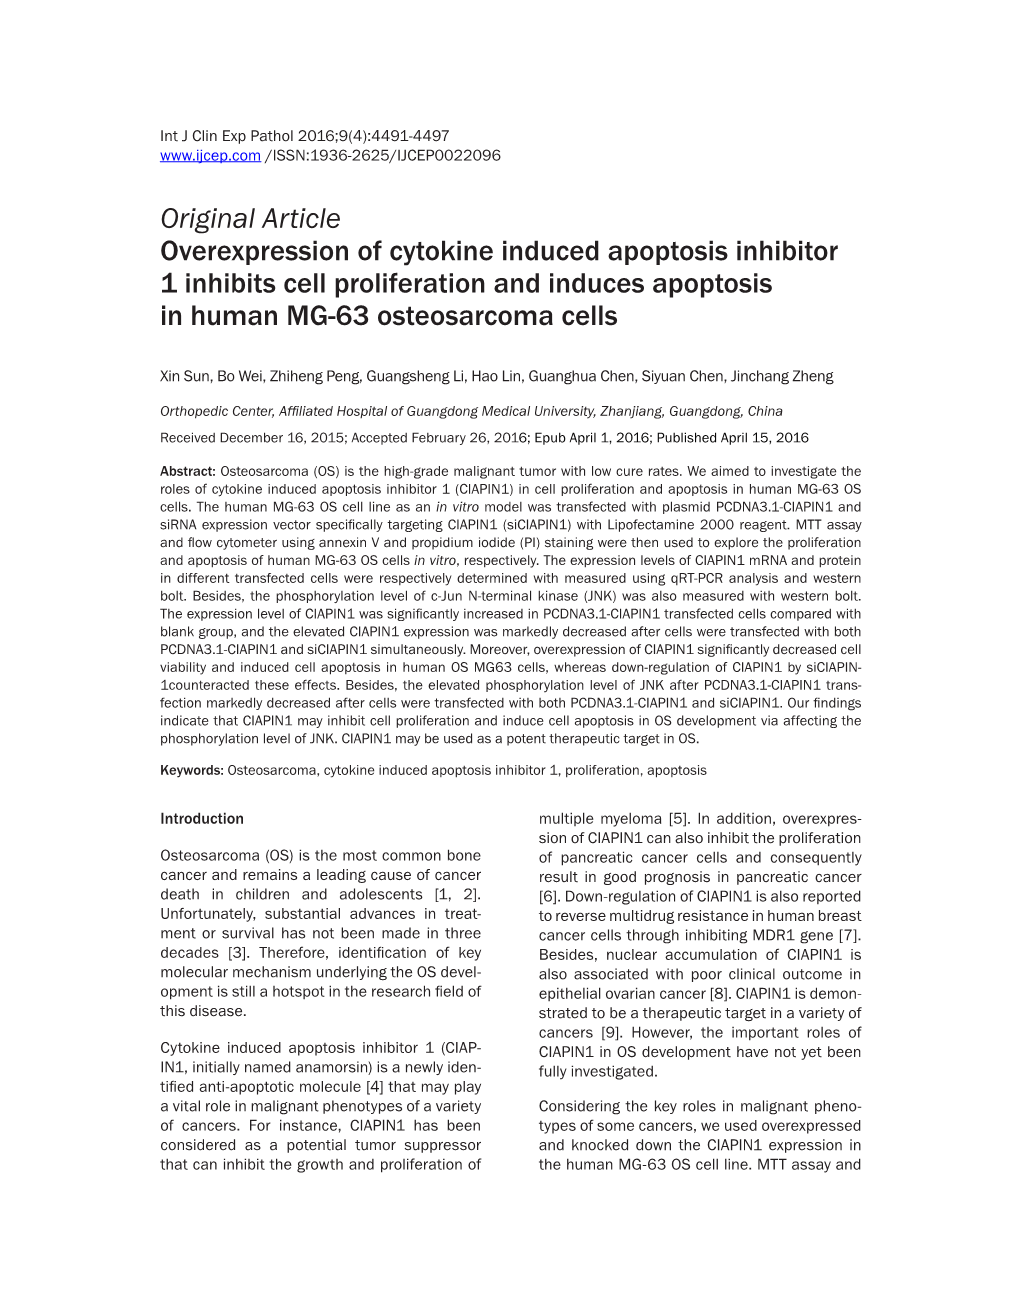 Original Article Overexpression of Cytokine Induced Apoptosis Inhibitor 1 Inhibits Cell Proliferation and Induces Apoptosis in Human MG-63 Osteosarcoma Cells